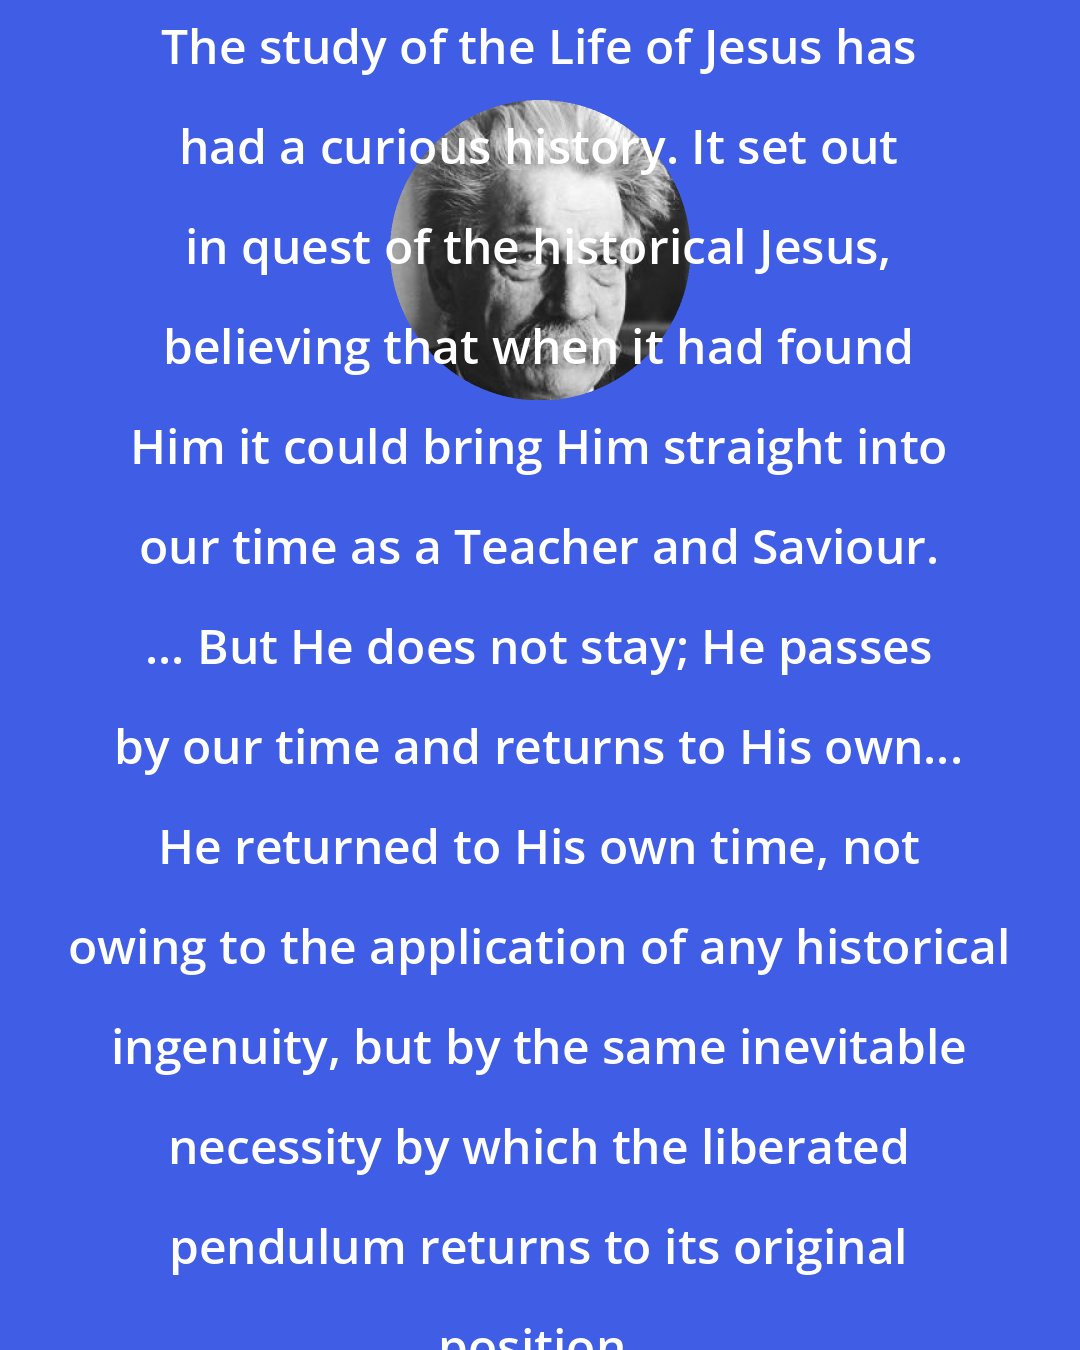 Albert Schweitzer: The study of the Life of Jesus has had a curious history. It set out in quest of the historical Jesus, believing that when it had found Him it could bring Him straight into our time as a Teacher and Saviour. ... But He does not stay; He passes by our time and returns to His own... He returned to His own time, not owing to the application of any historical ingenuity, but by the same inevitable necessity by which the liberated pendulum returns to its original position.